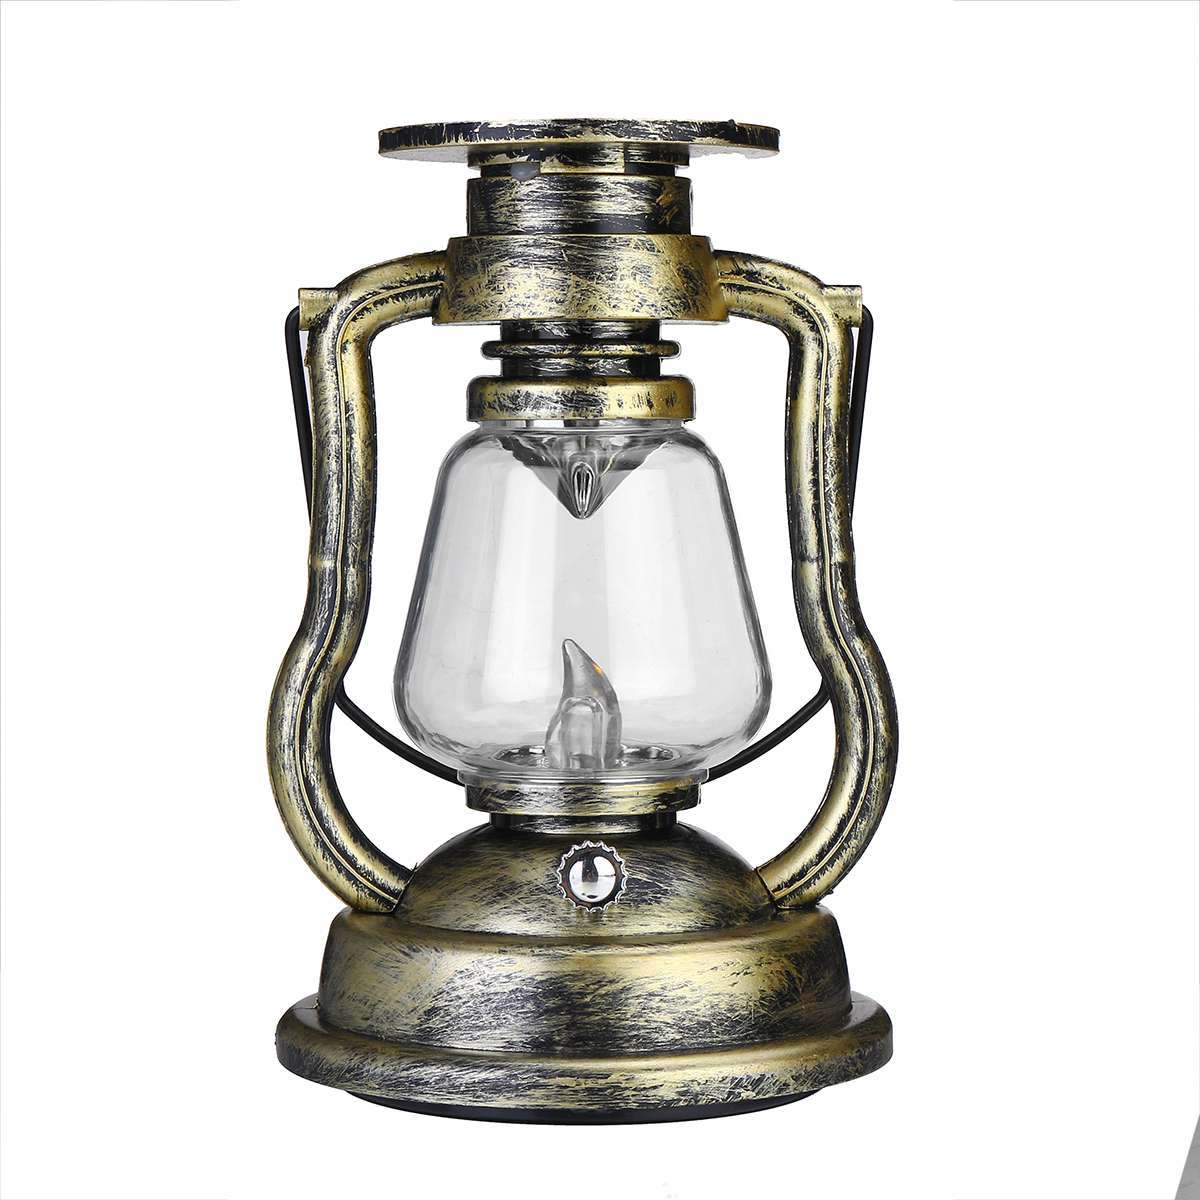 Outdoor Garden lamp Solar Powered LED Light Hanging Lantern Flameless Candle Lamp Portable Nightlight Vintage Style Home Decor